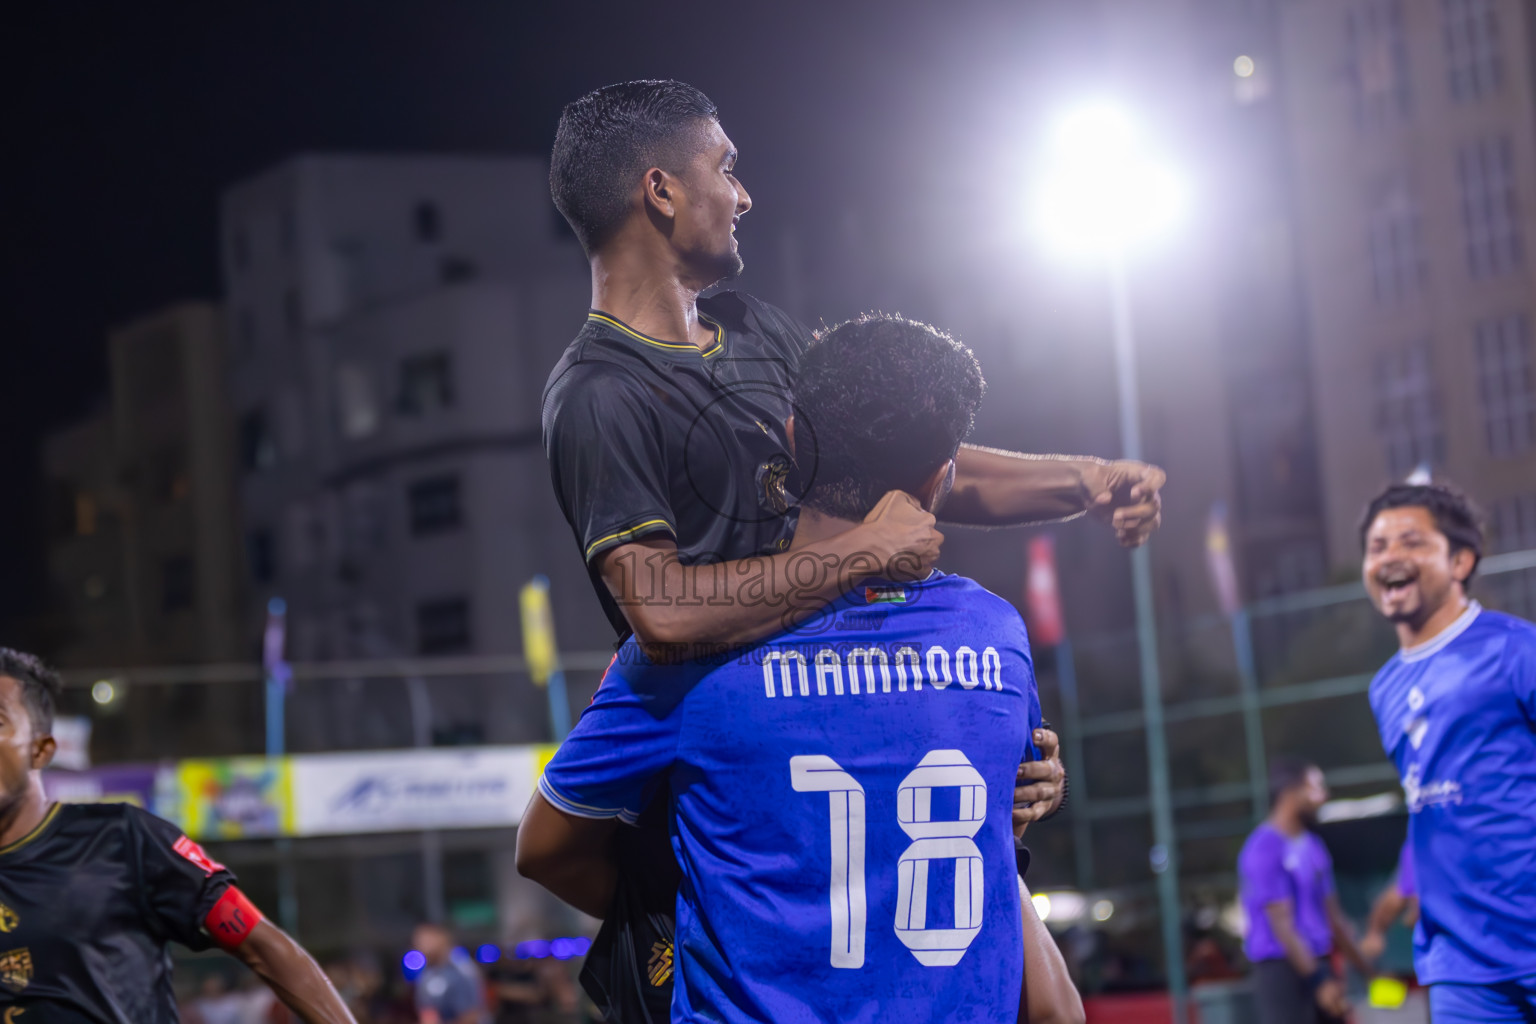 HA Utheemu vs HDh Naivaadhoo in Zone 1 Final on Day 389 of Golden Futsal Challenge 2024 which was held on Saturday, 24th February 2024, in Hulhumale', Maldives Photos: Ismail Thoriq / images.mv